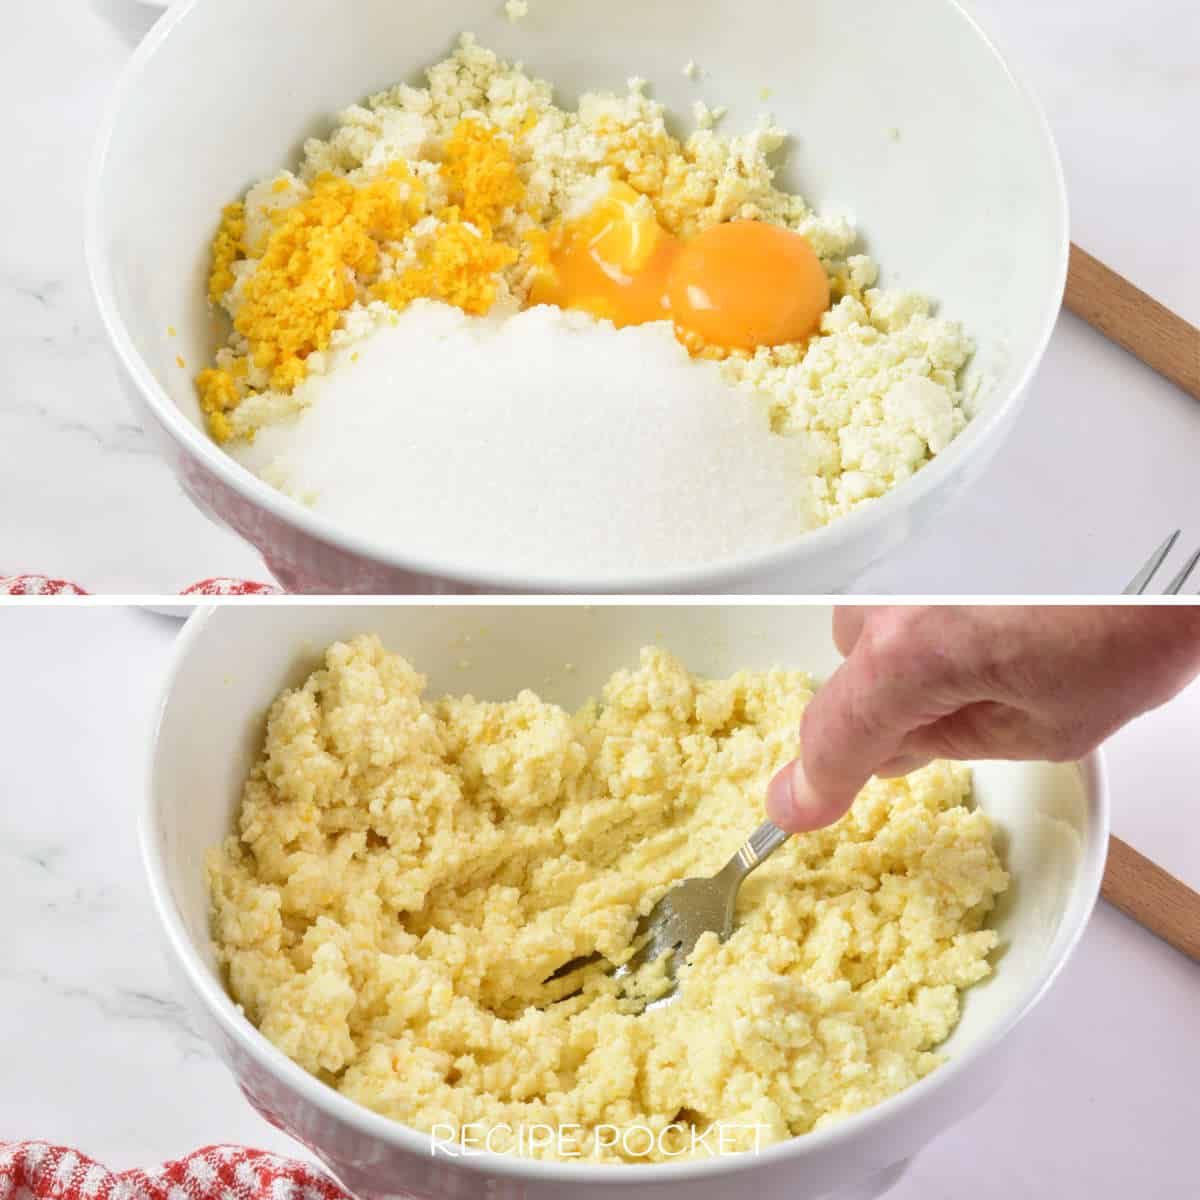 Eggs in bowl with ricotta cheese and sugar.